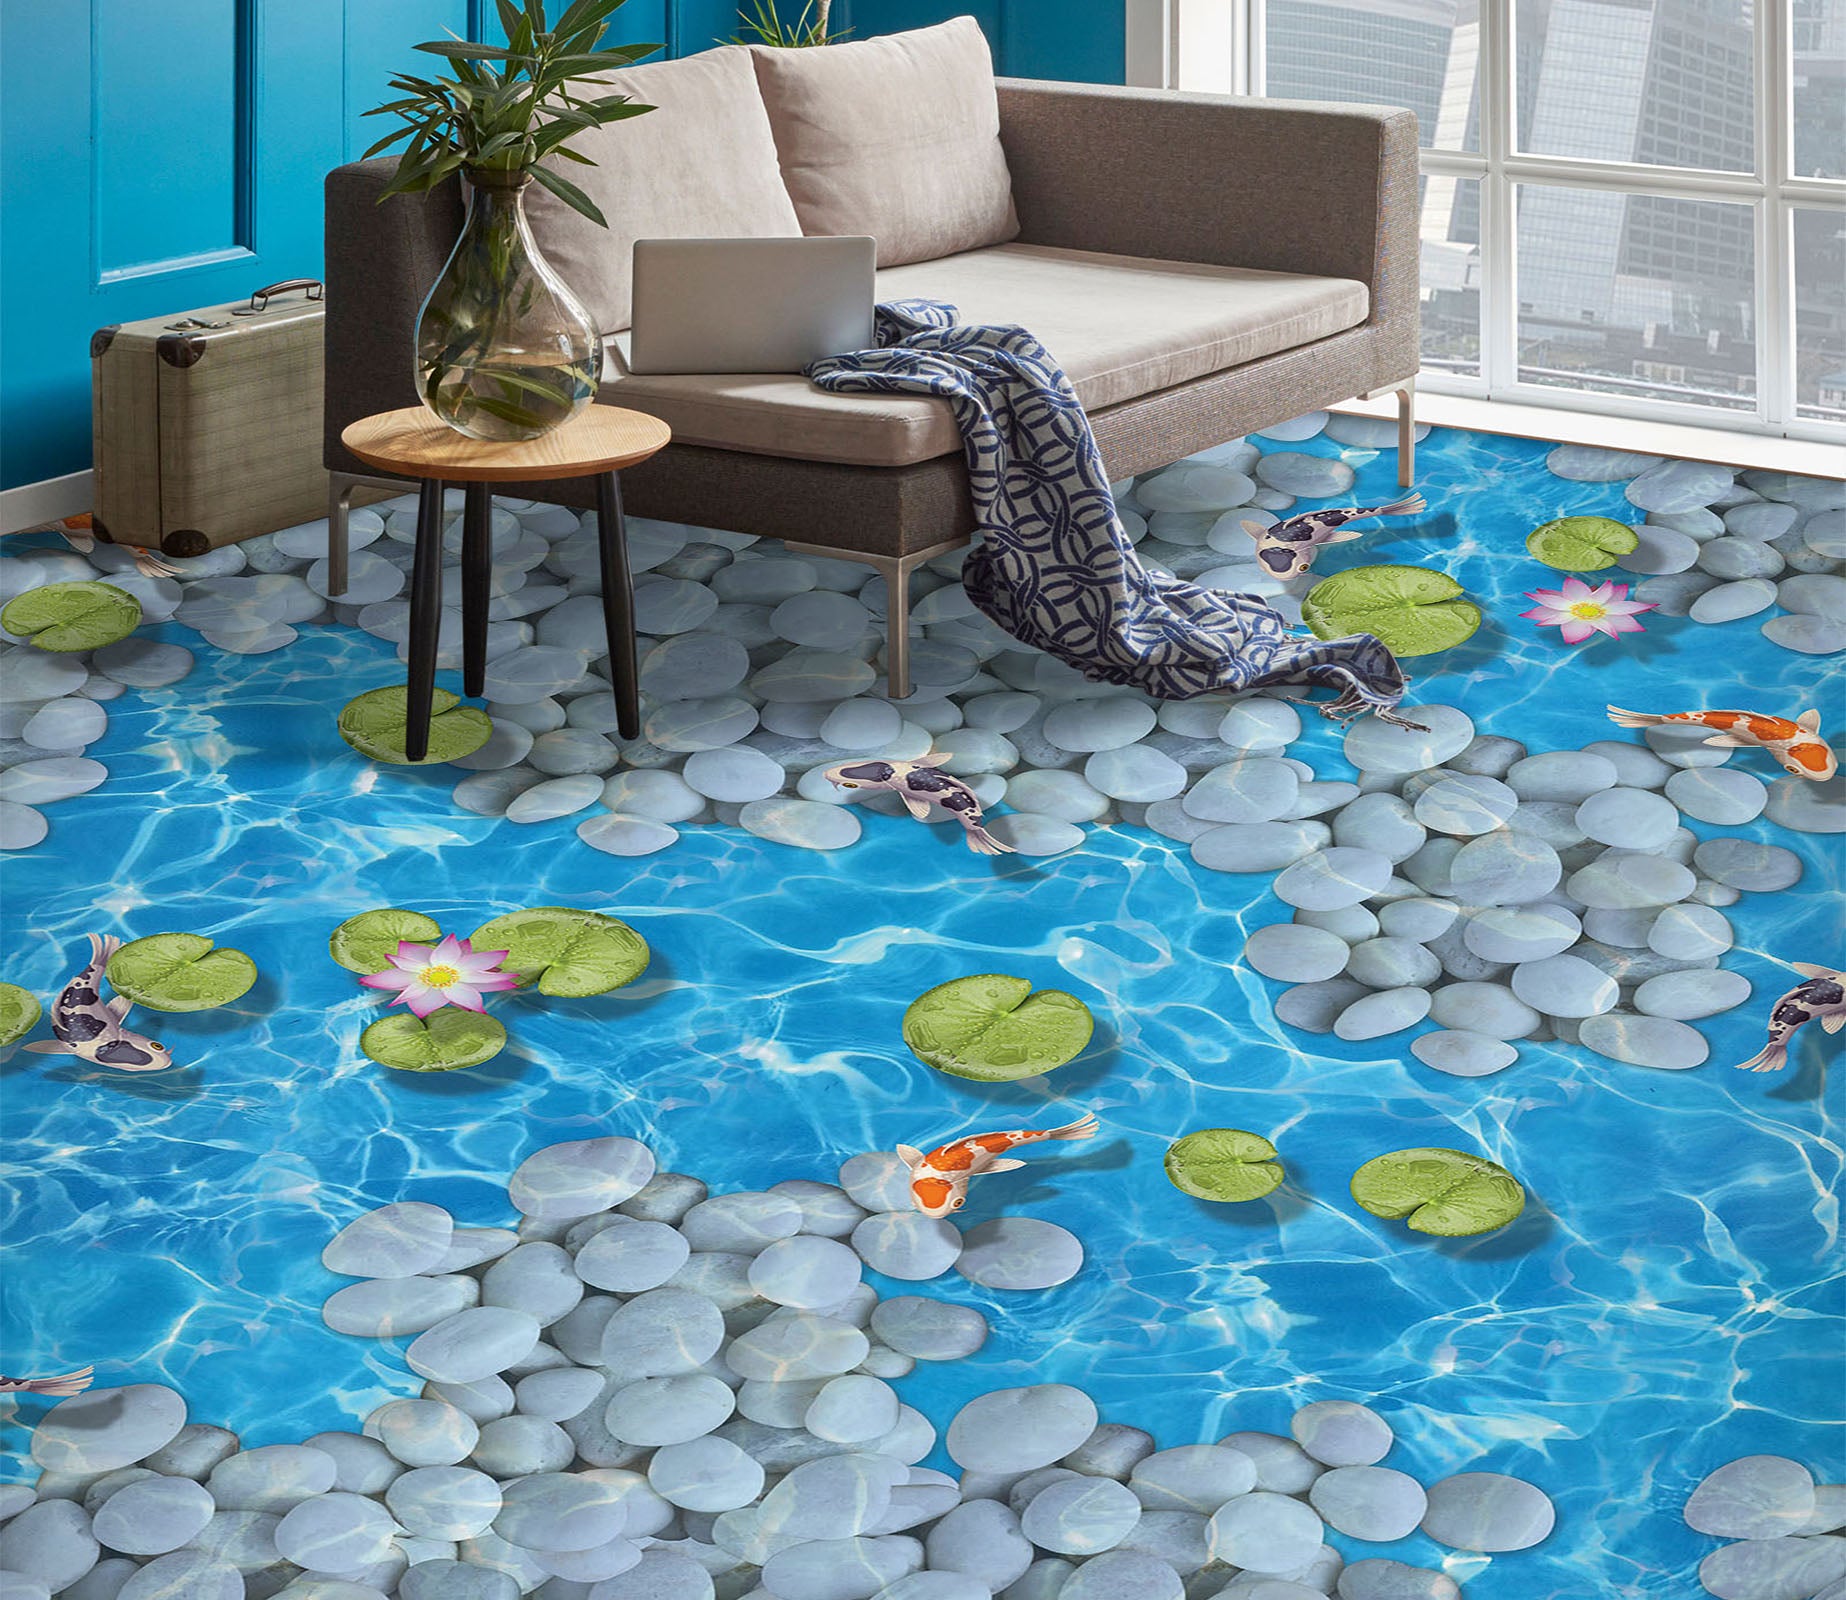 3D Duckweed And White Pebbles 294 Floor Mural